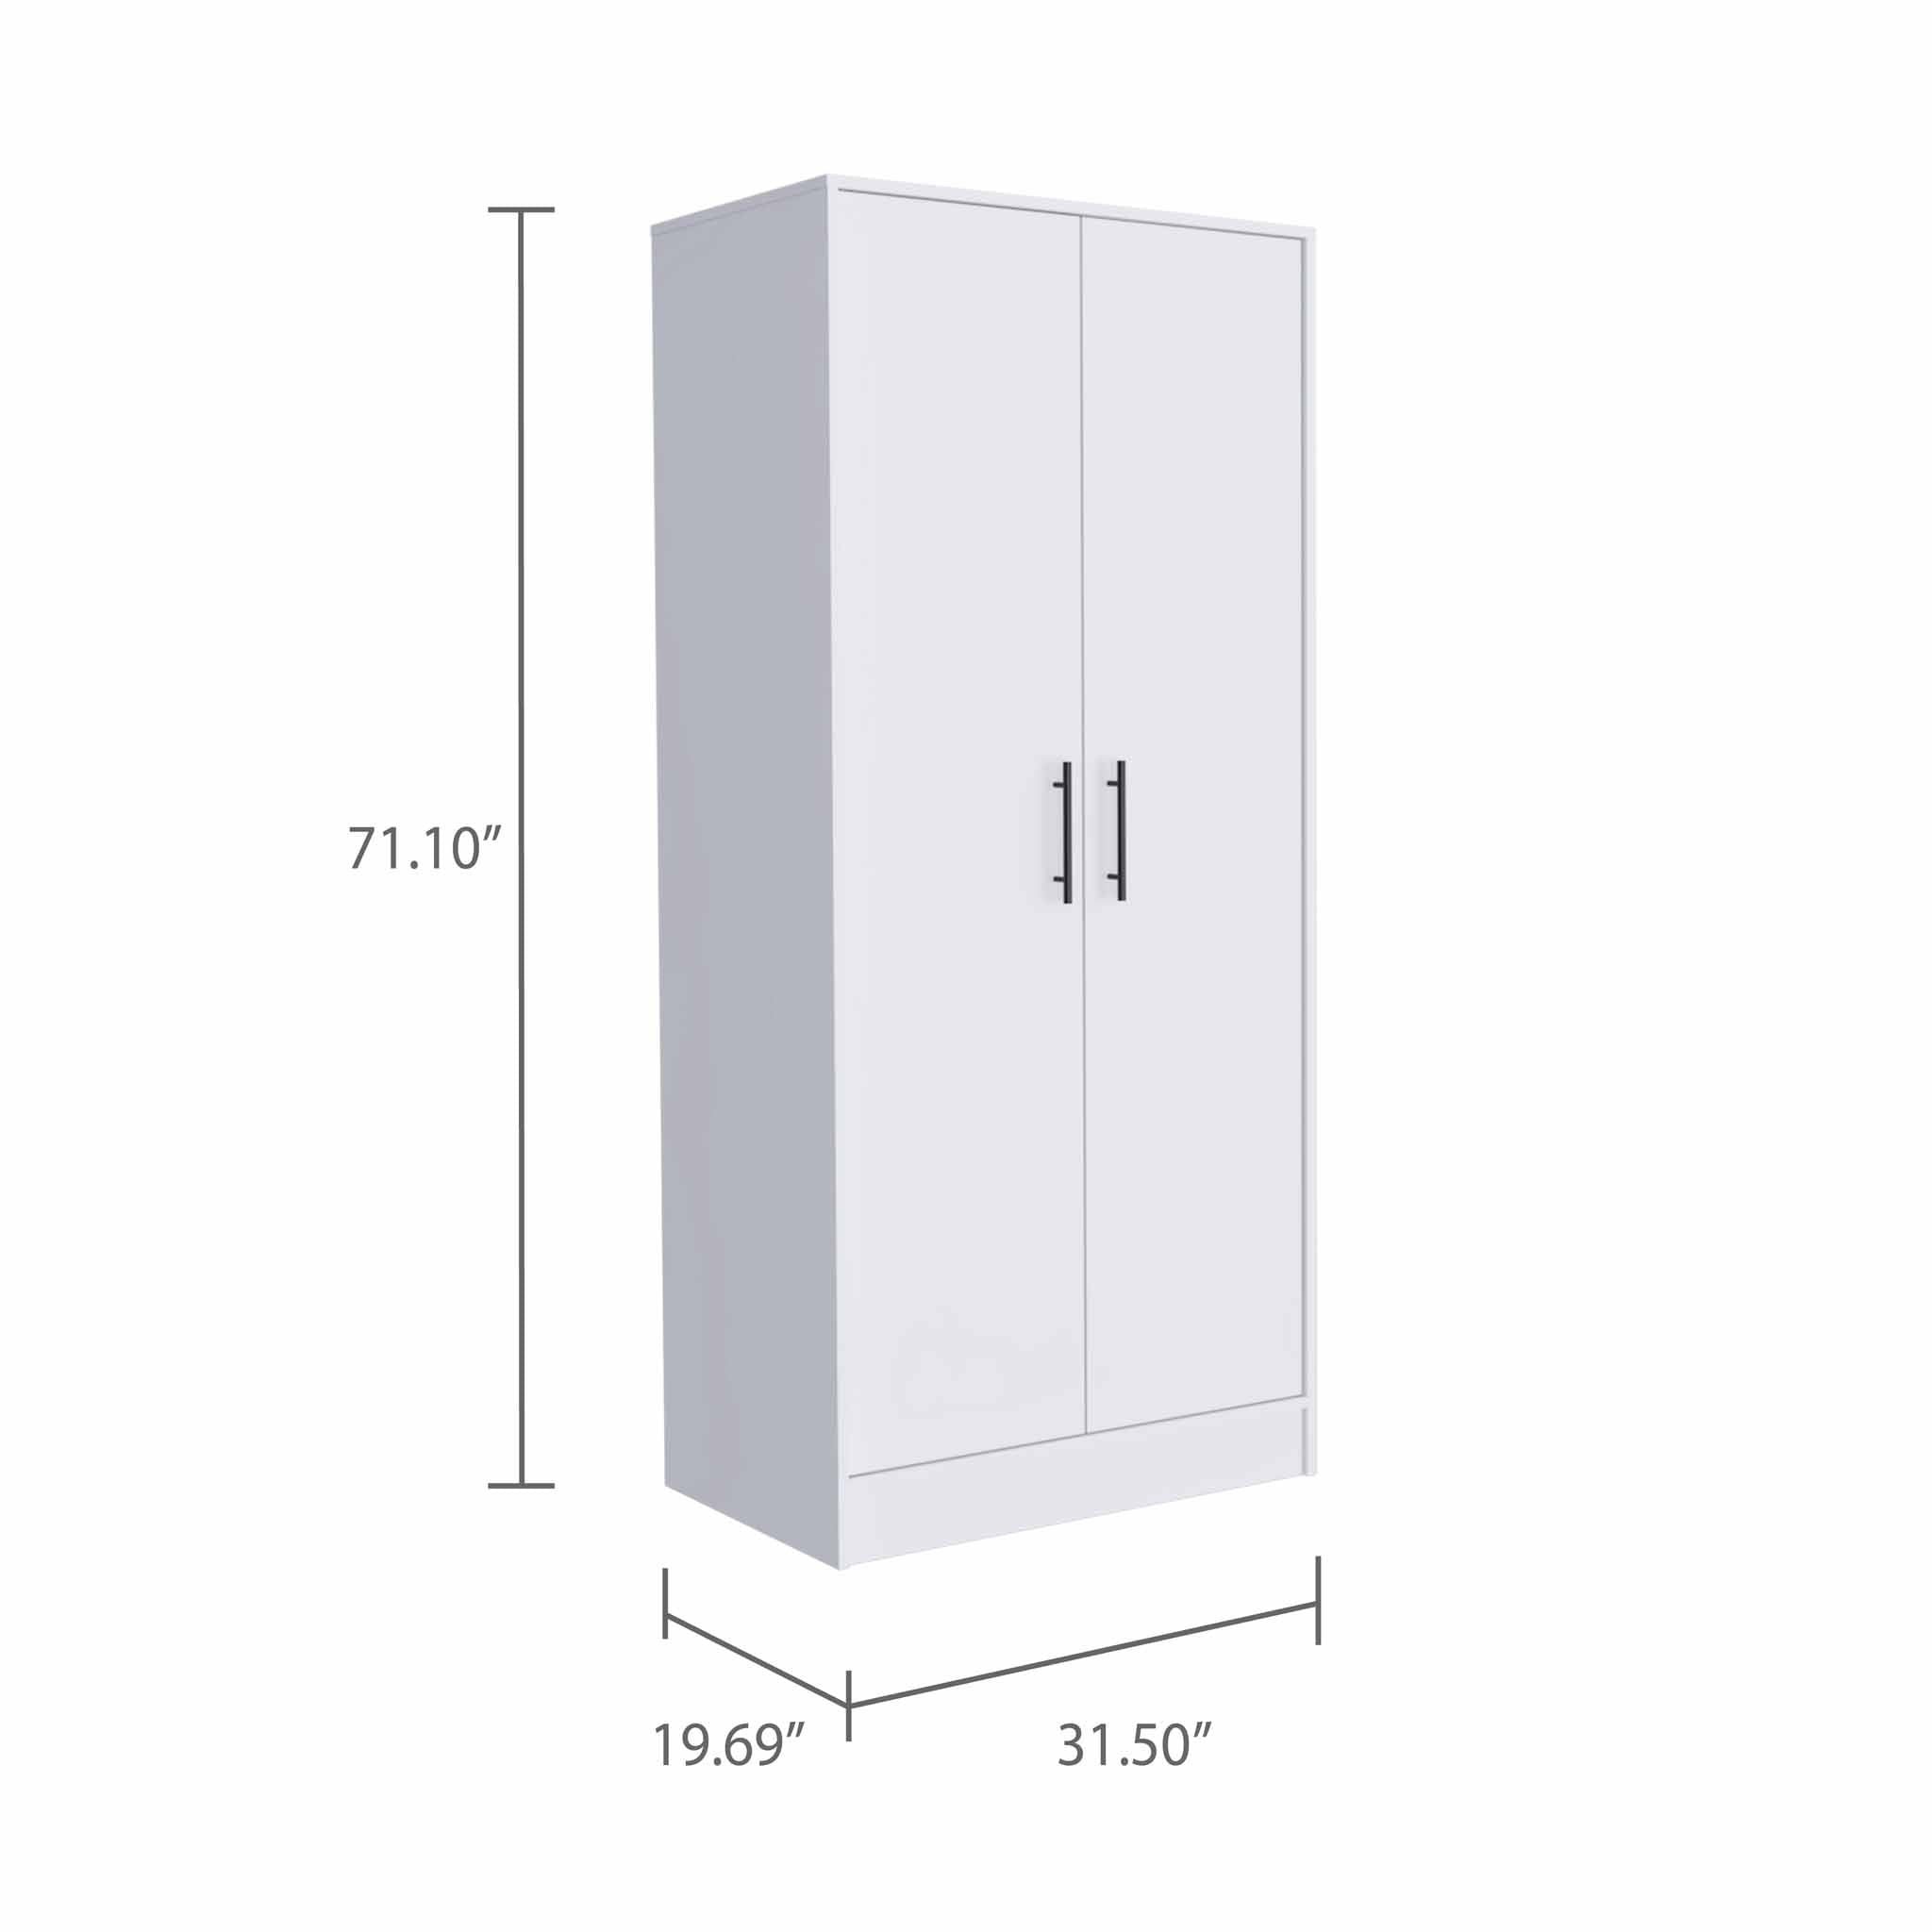 71" White Tall Two Door Closet Default Title